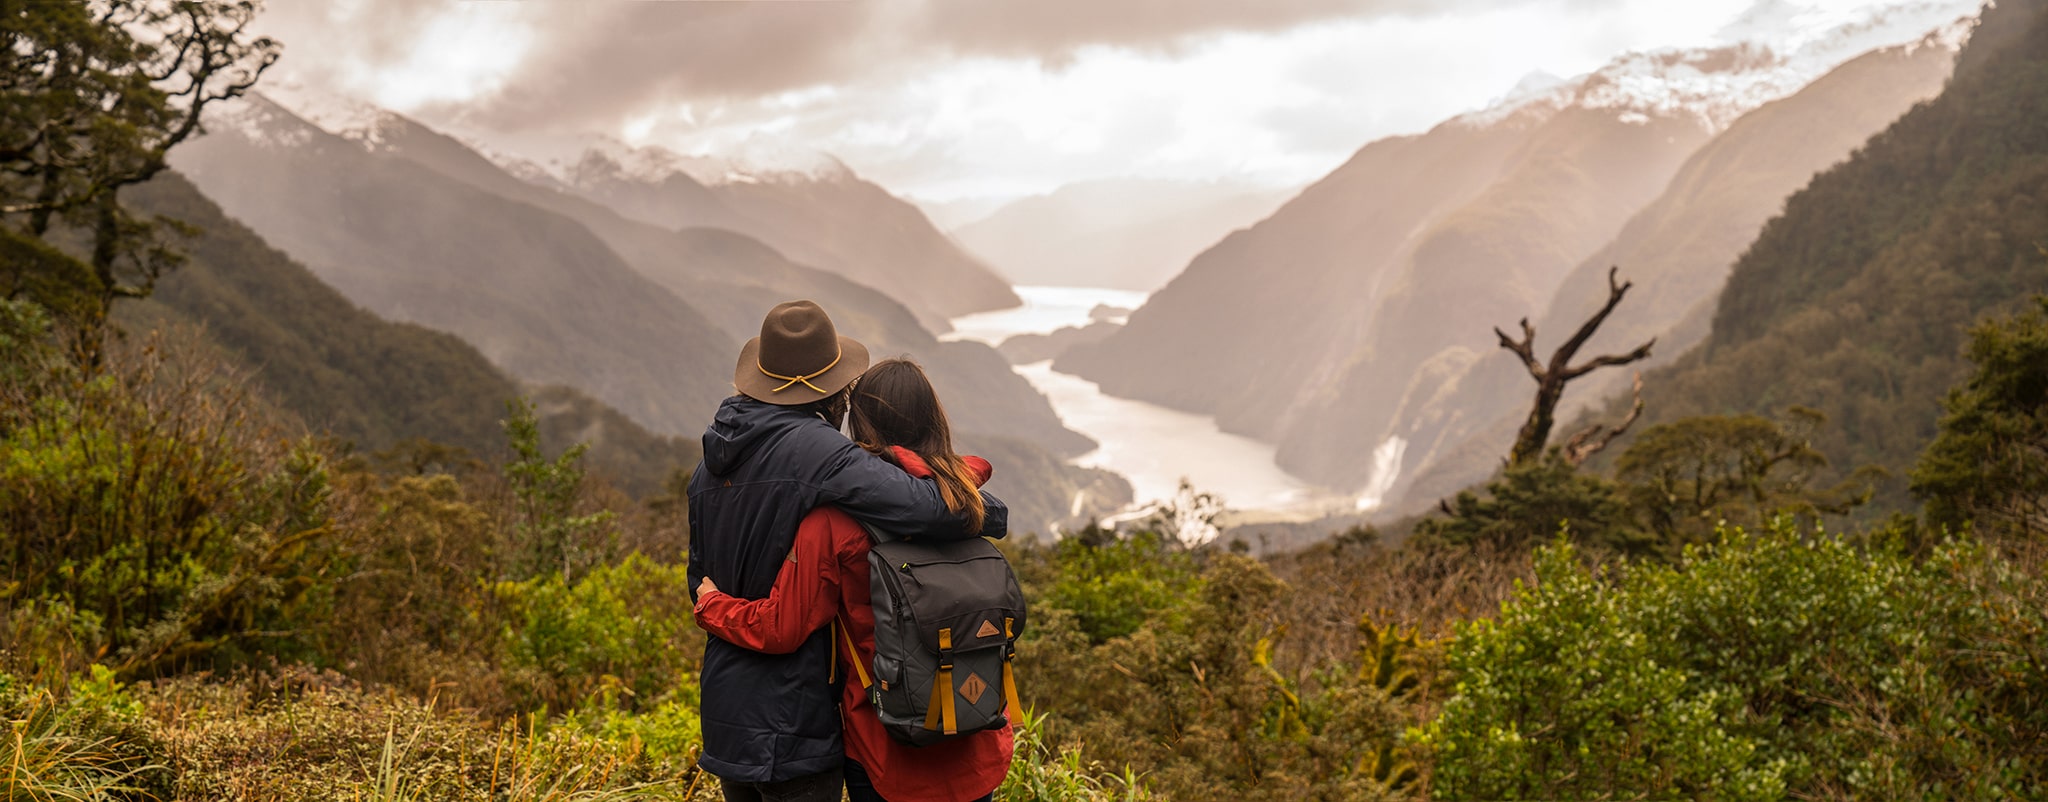 Couple at the Wilmot pass overlooking Doubtful Sound